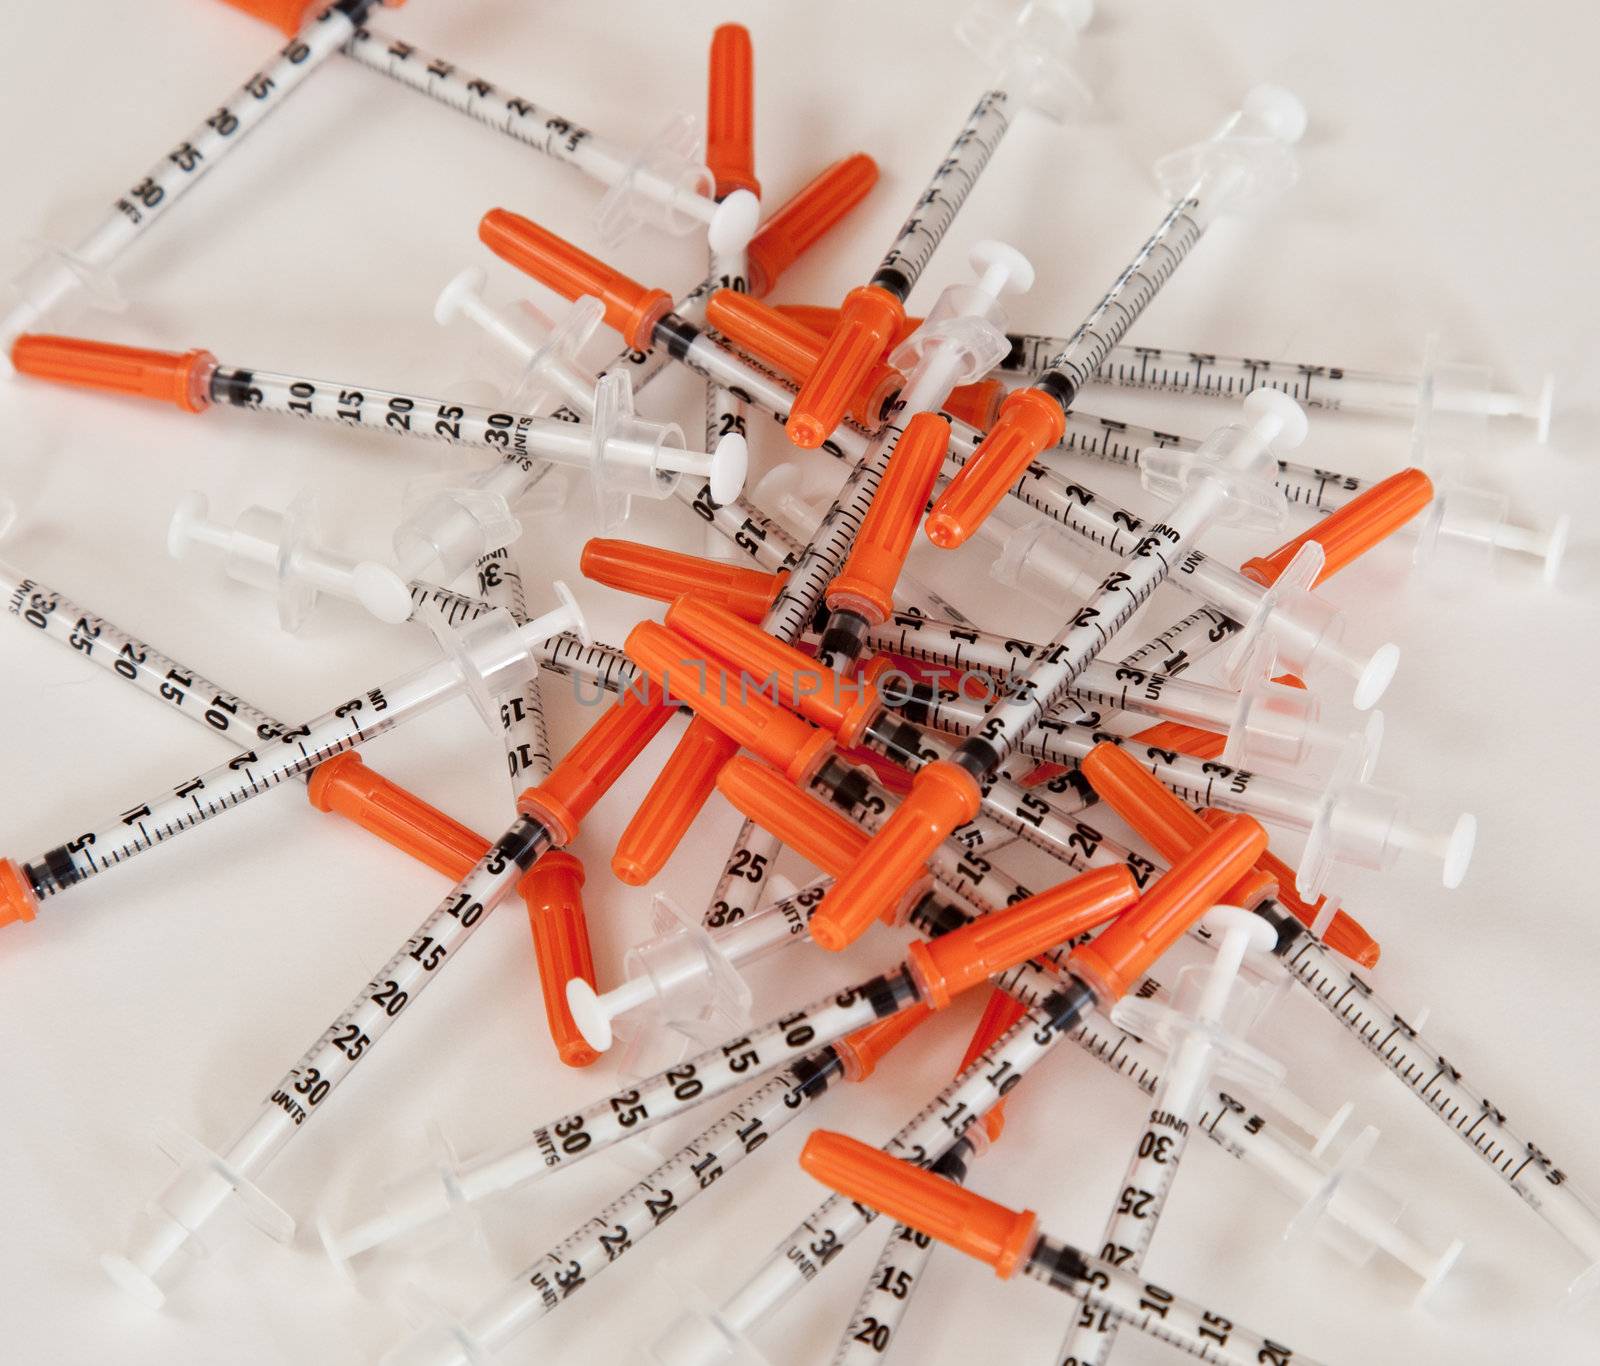 Pile of used syringes by steheap